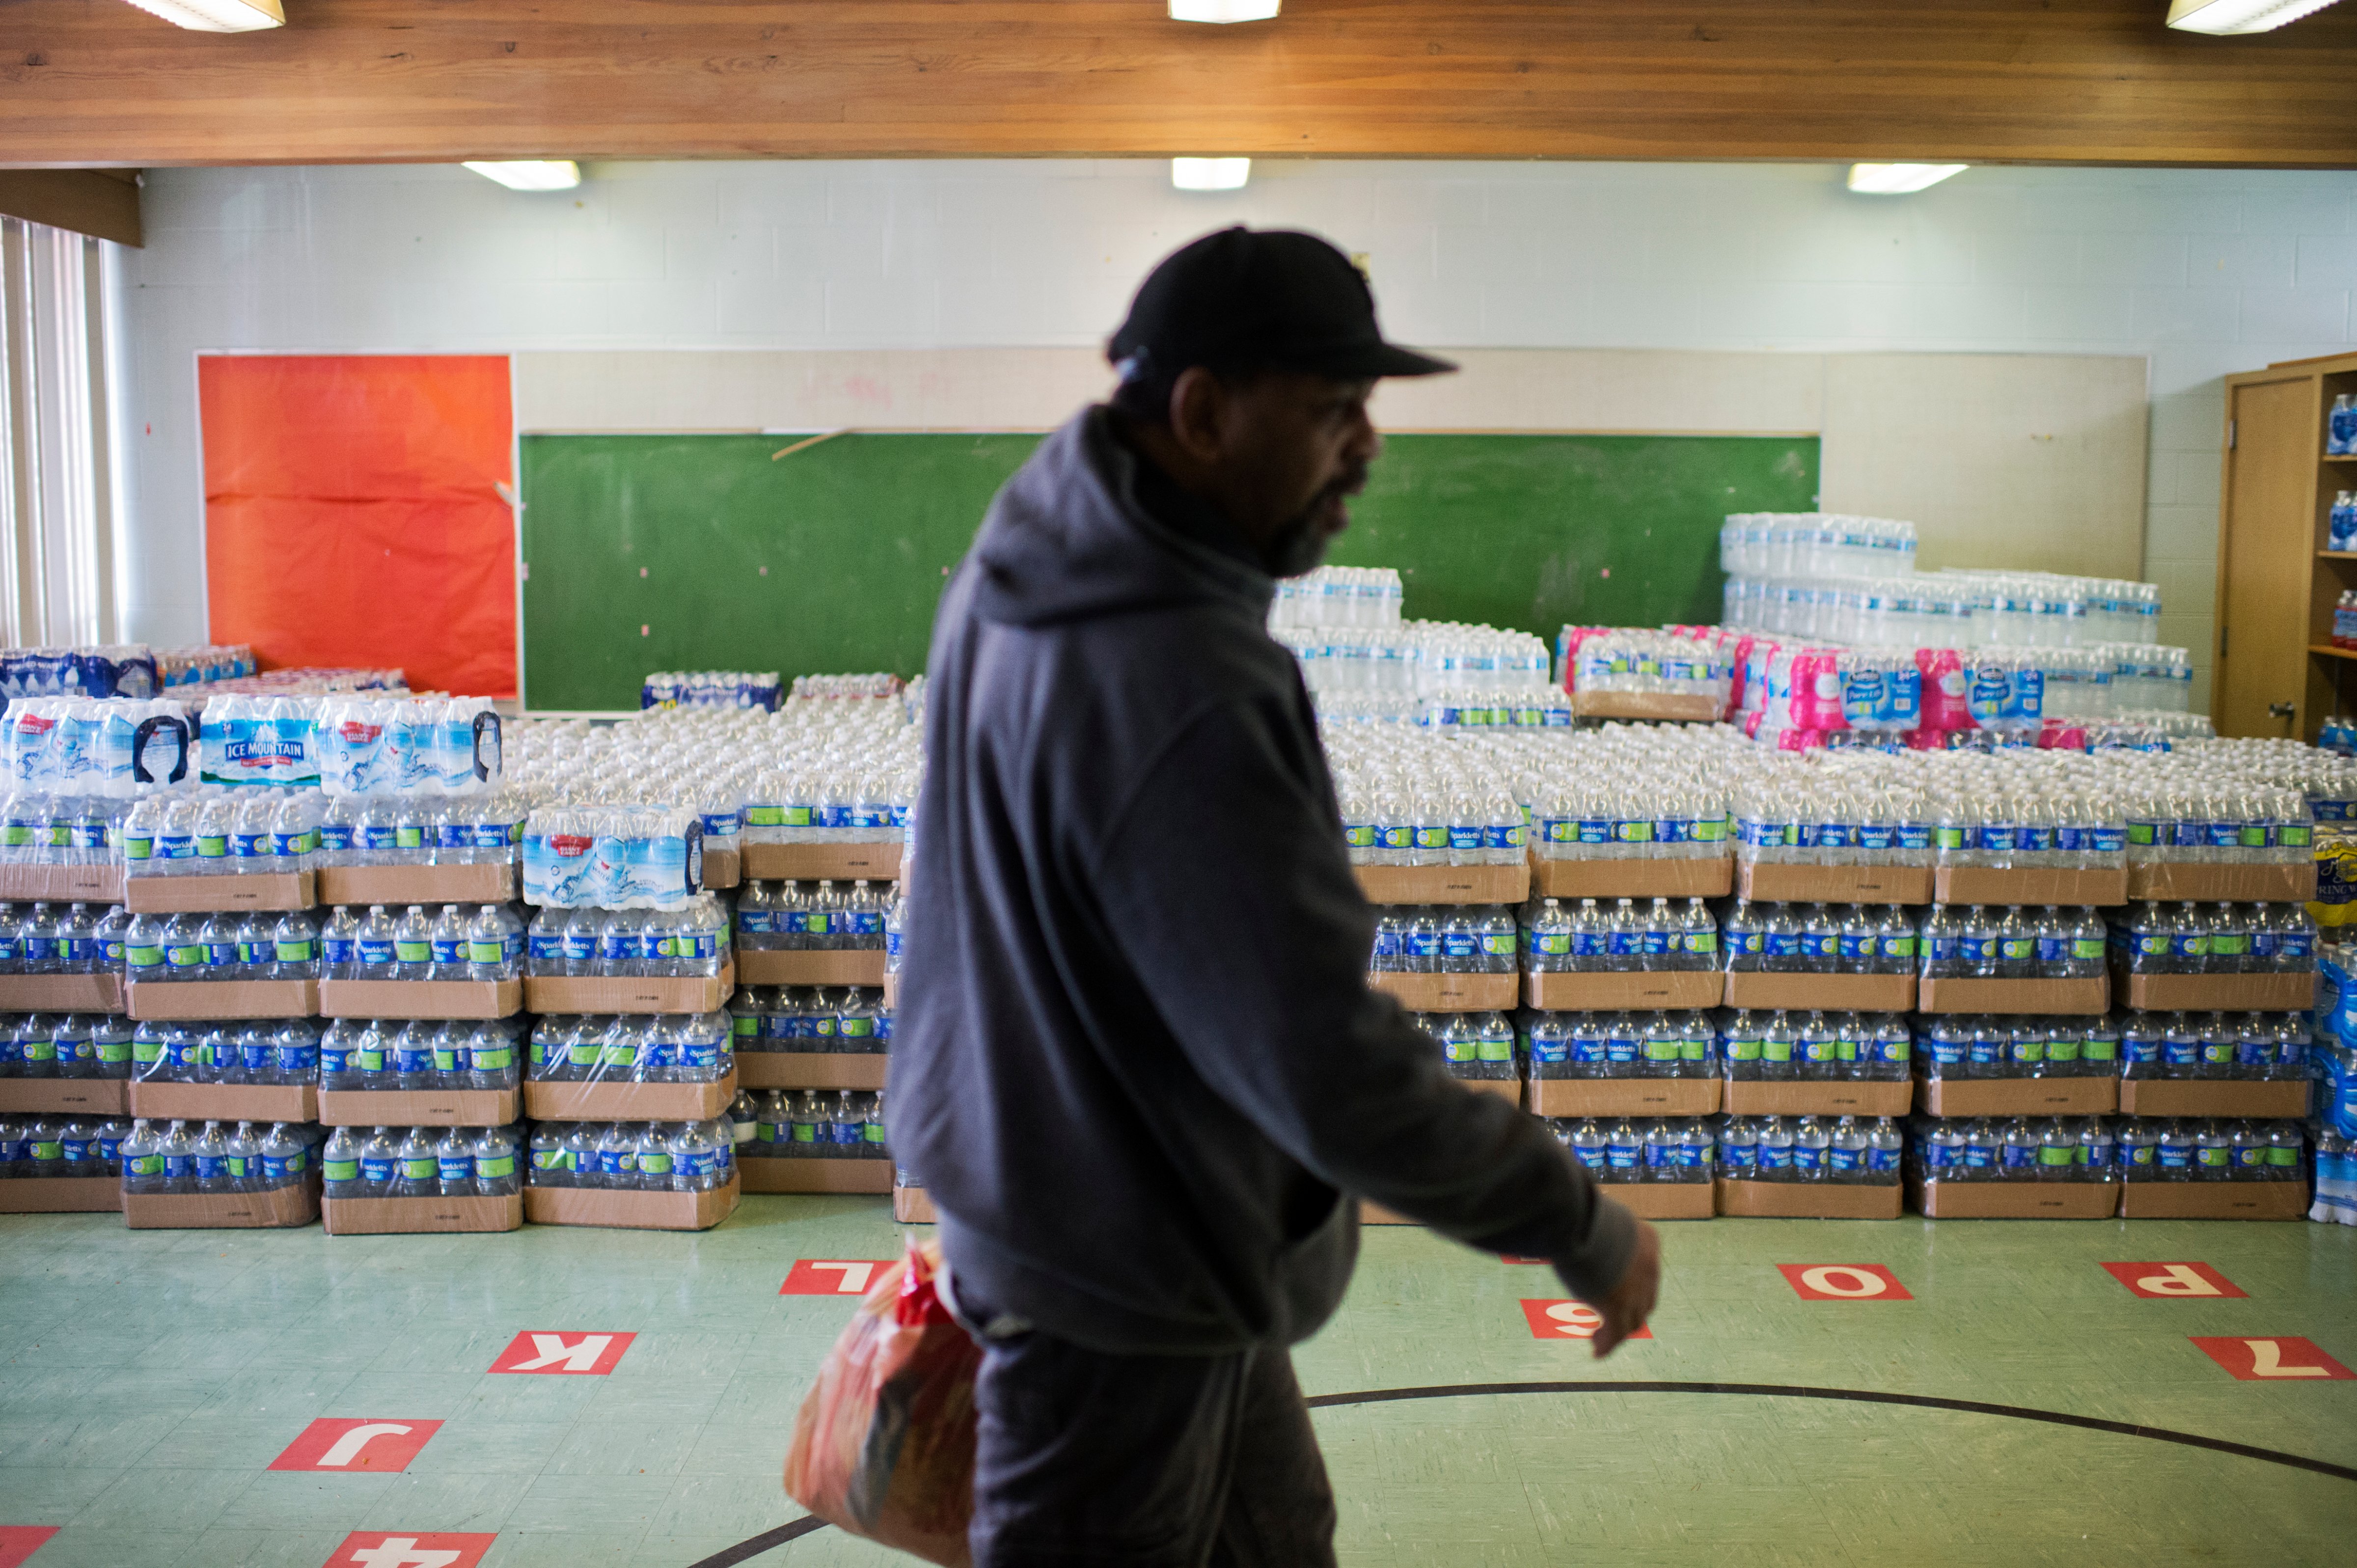 UNITED STATES - FEBRUARY 23: A volunteer walks by cases of bottled water at the St. Mark Baptist Church in Flint, Mich., that serves as a water distribution area, February 23, 2016. The water supply was not properly treated after being switched from Lake Huron to the Flint River and now contains lead and iron. (Photo By Tom Williams/CQ Roll Call)